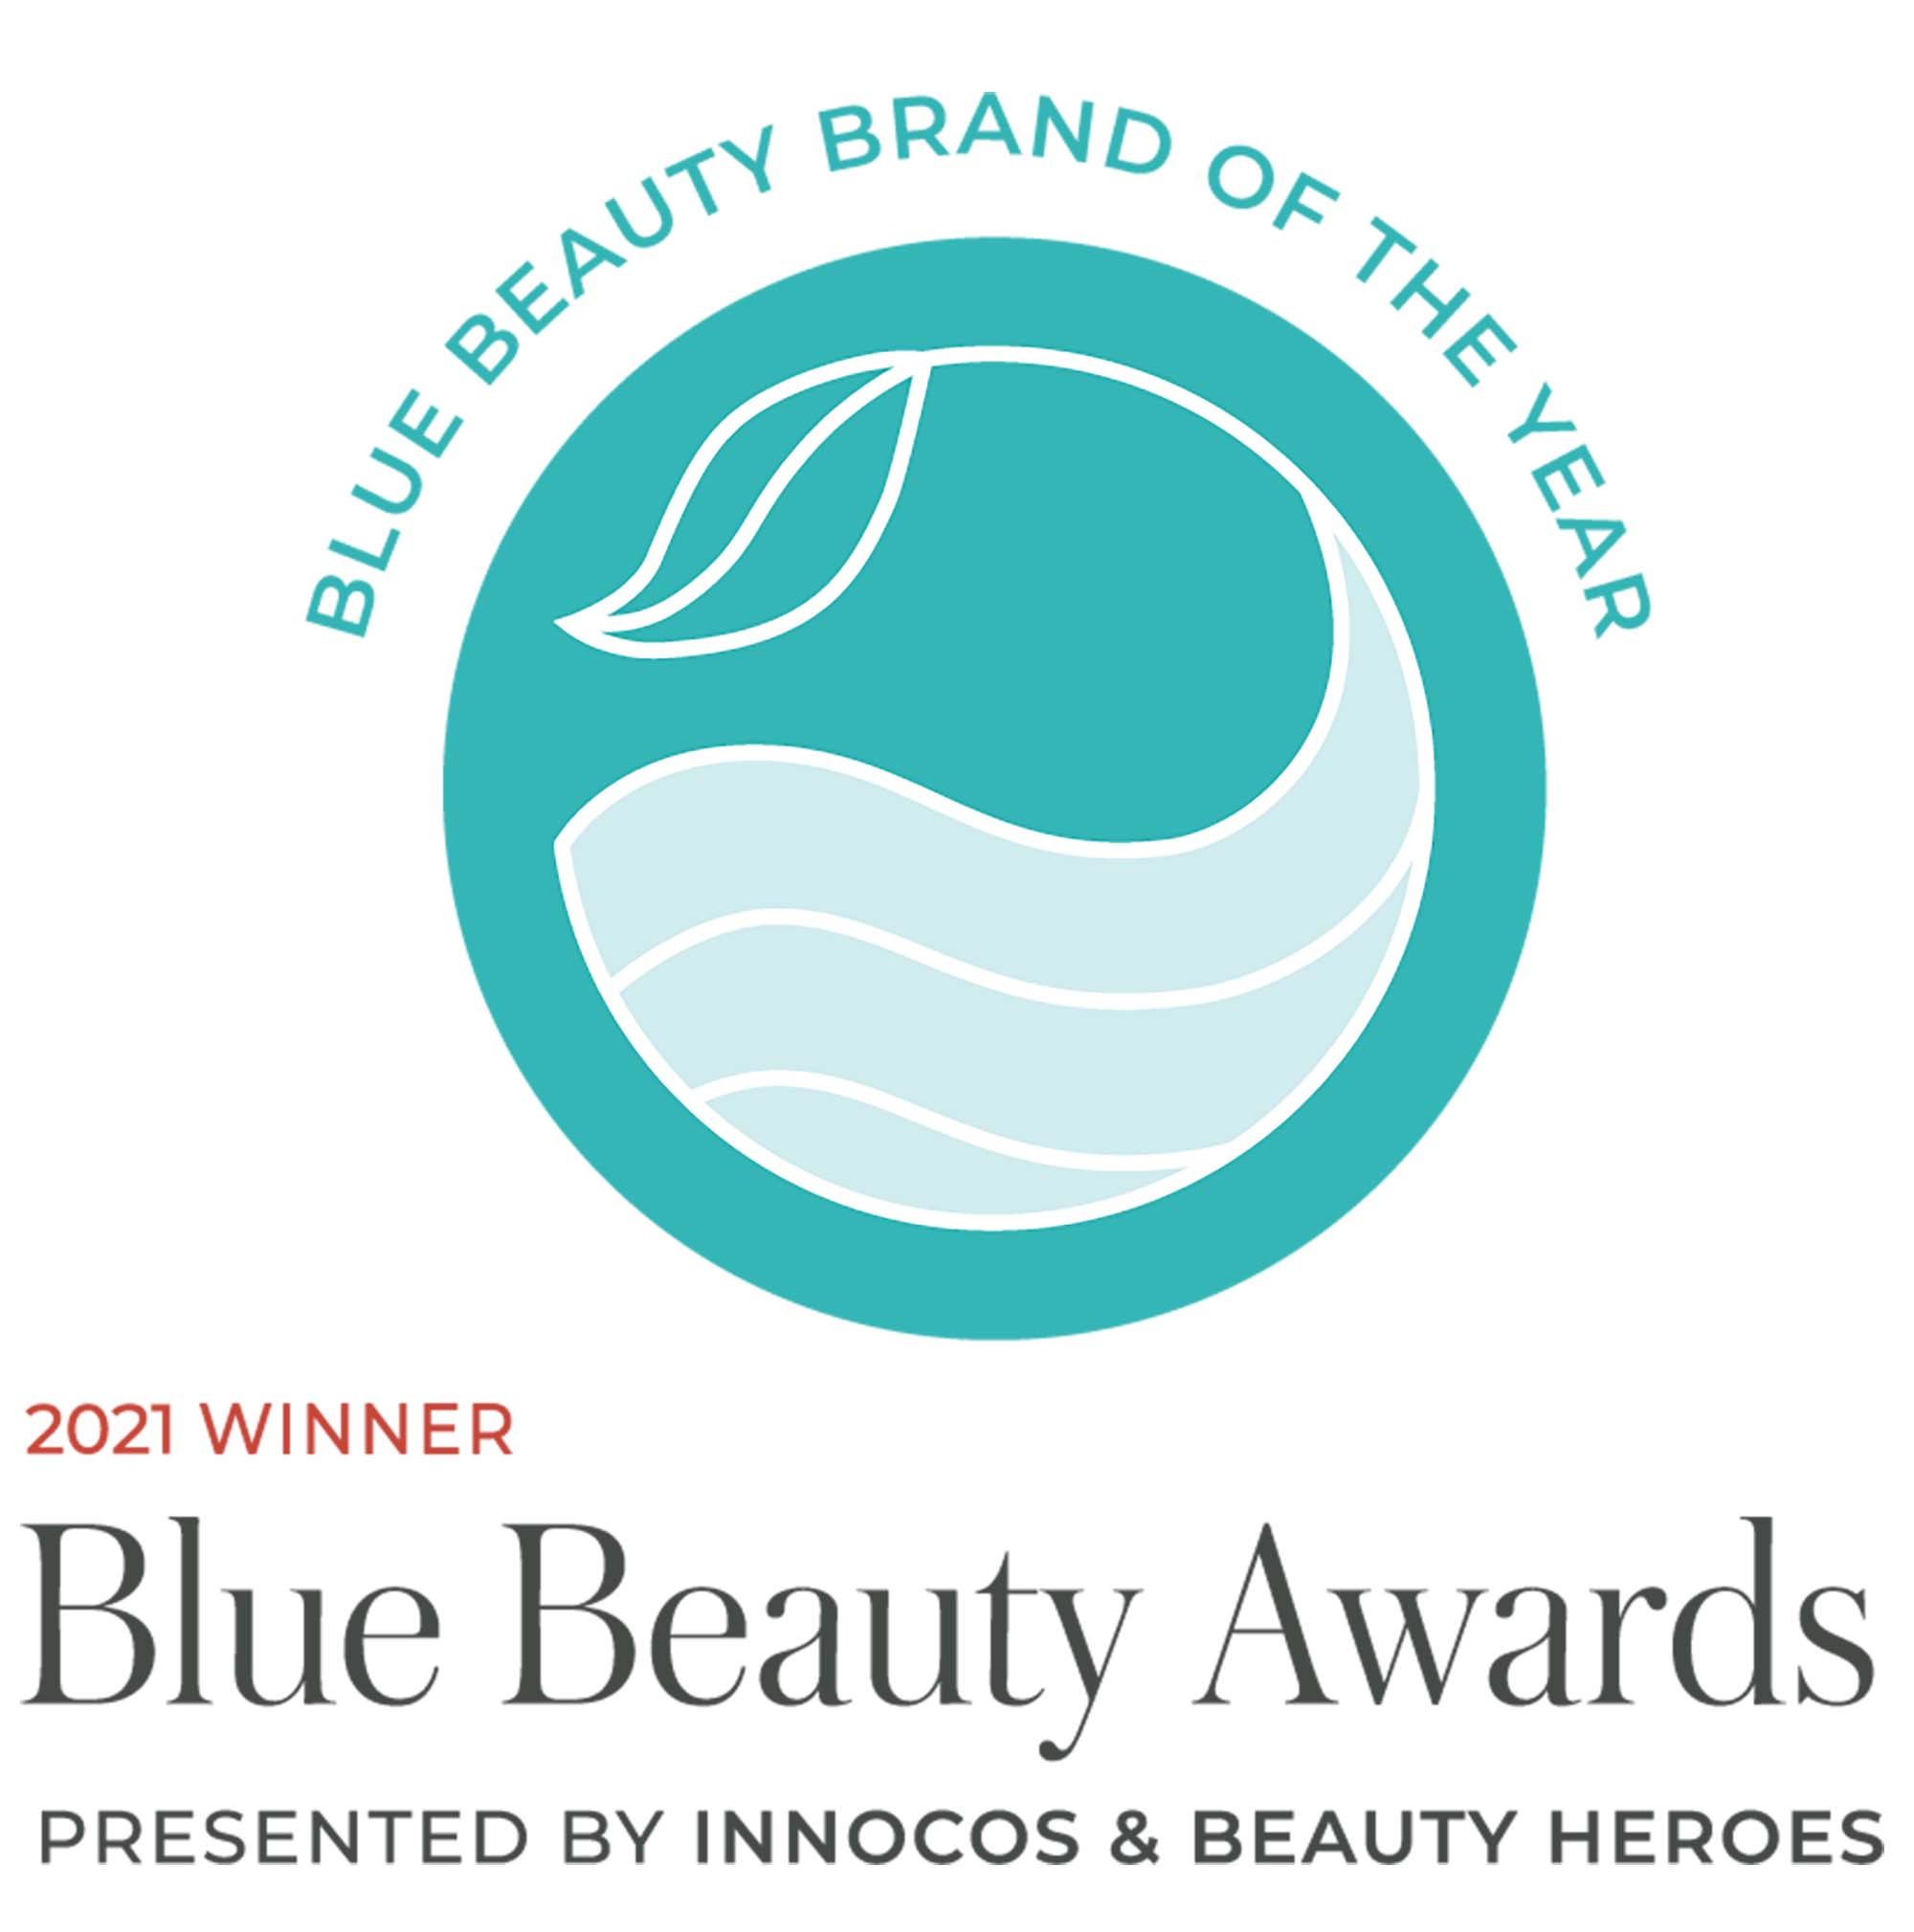 Awarded Blue Beauty of the Year, Kadalys is eco-friendly, sustainable skincare